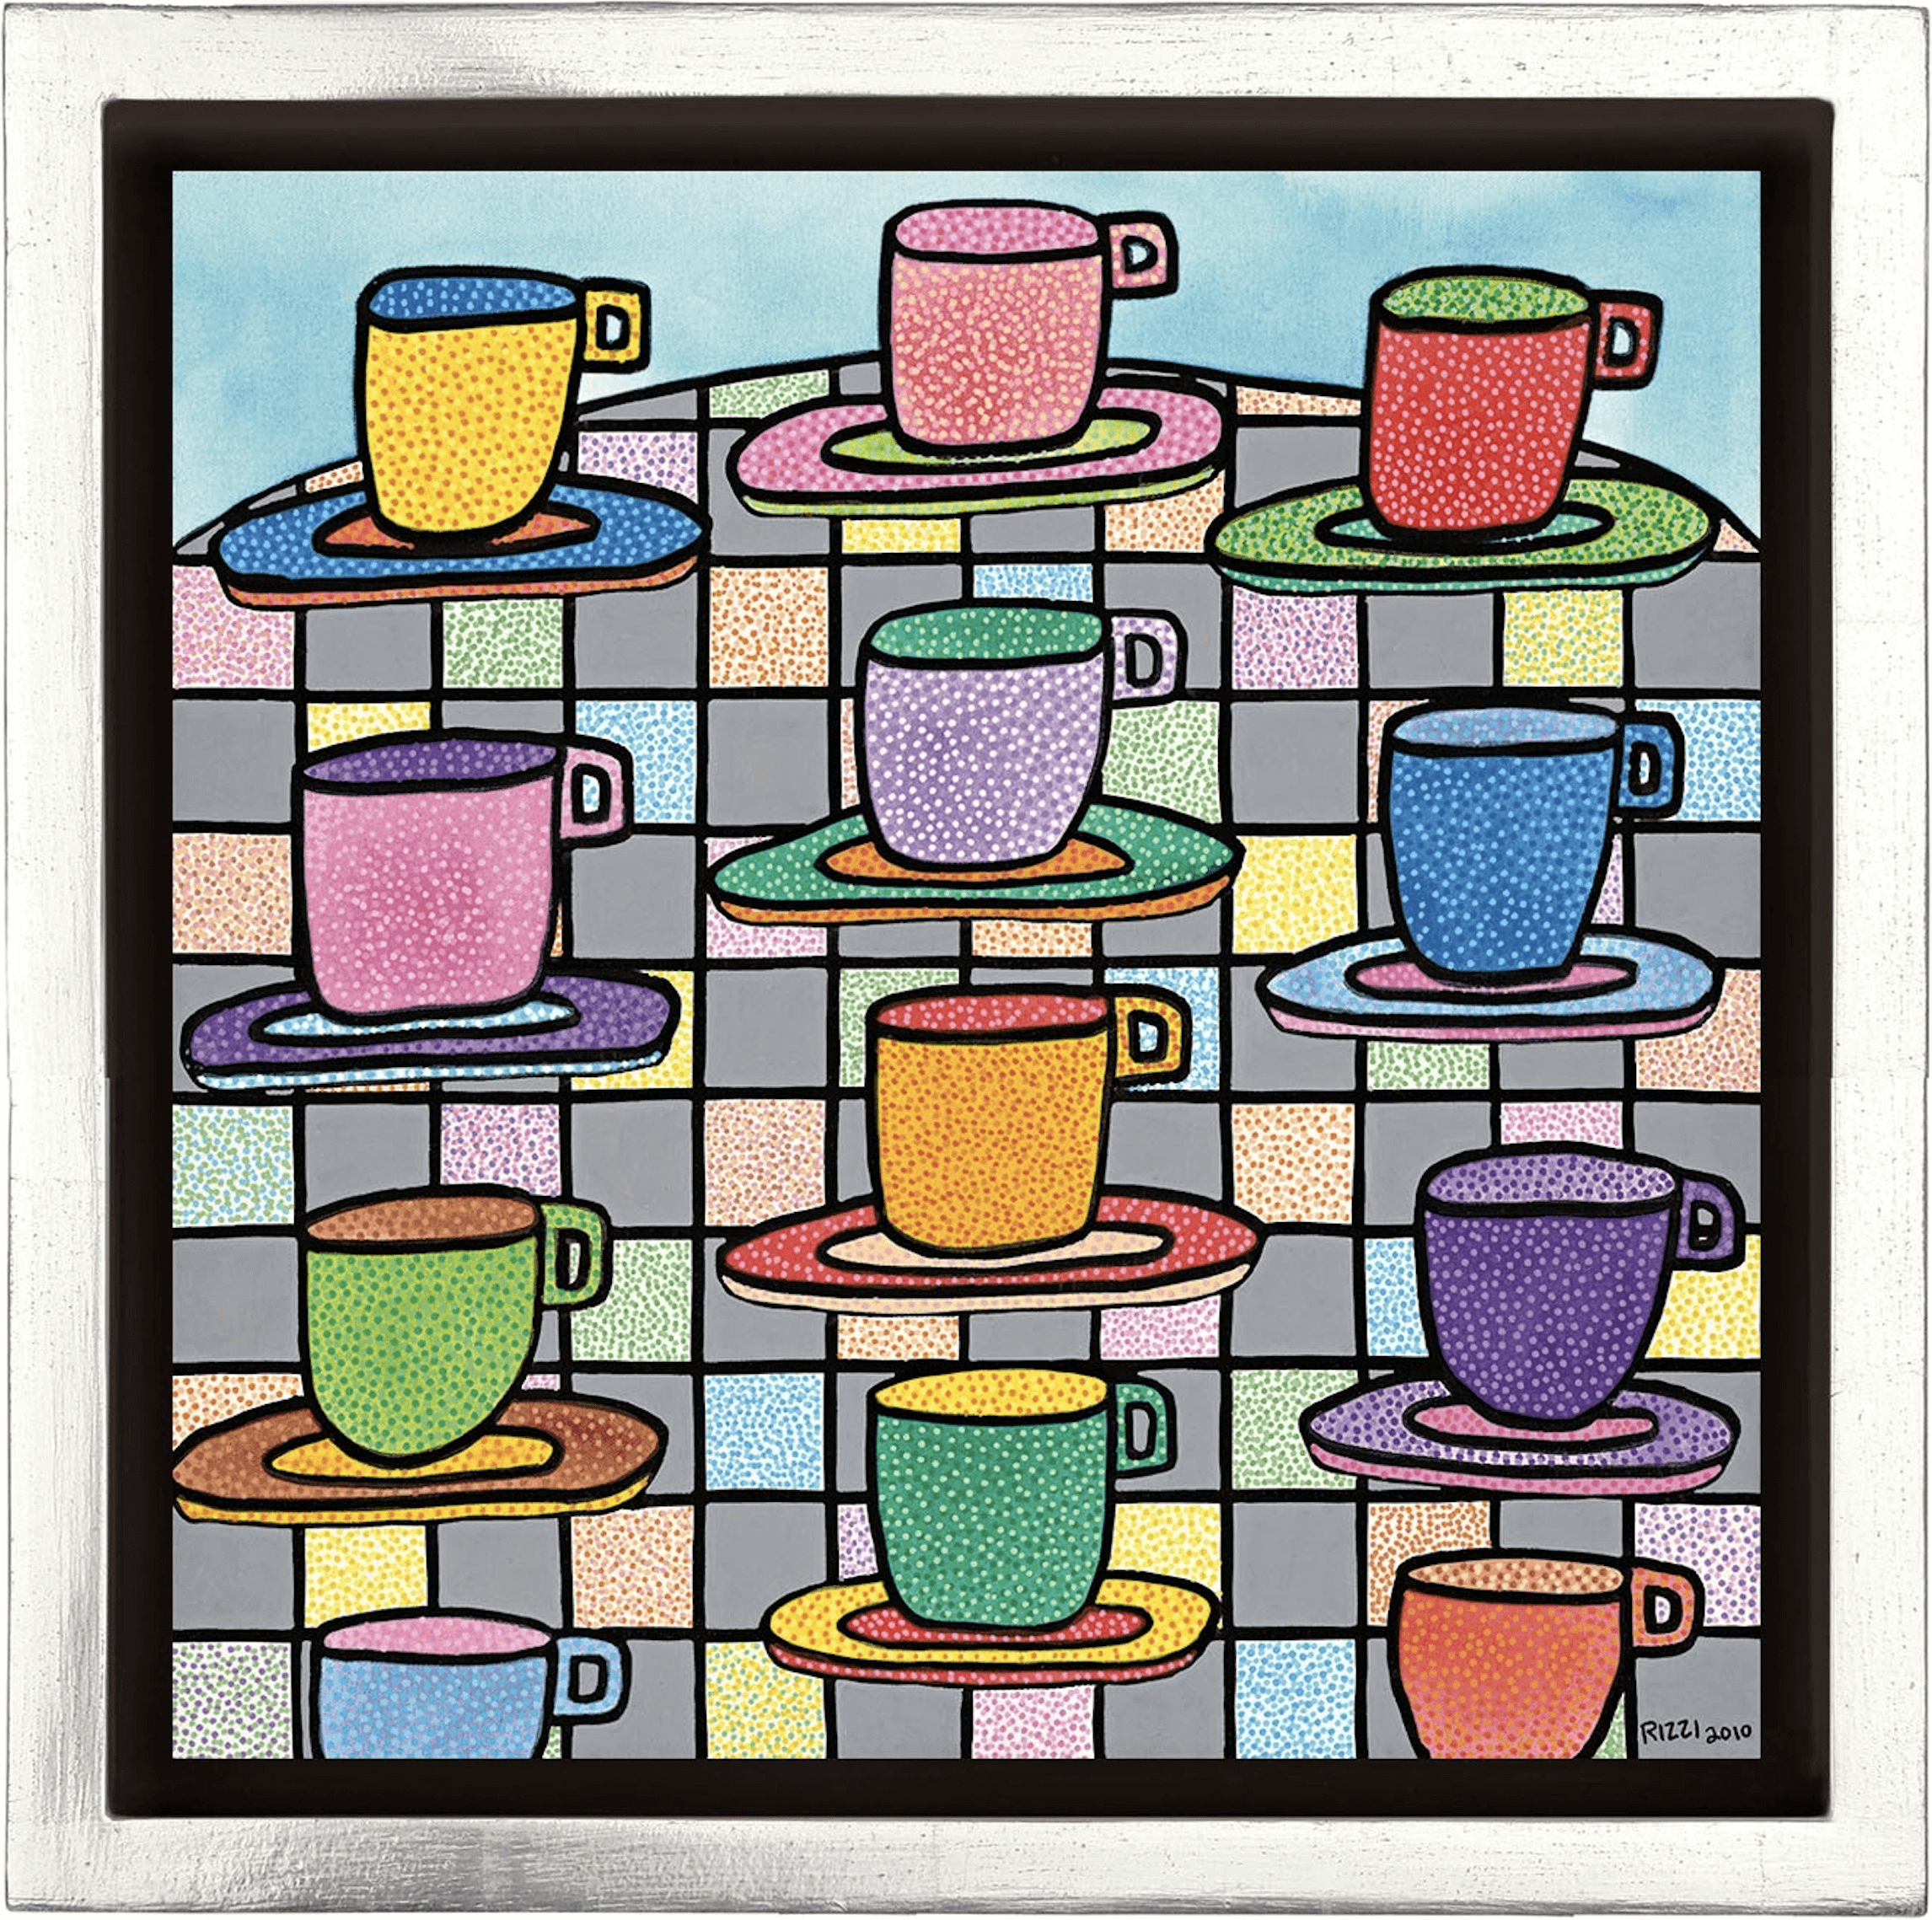 James Rizzi: The Most Colorful Cups Of Coffee